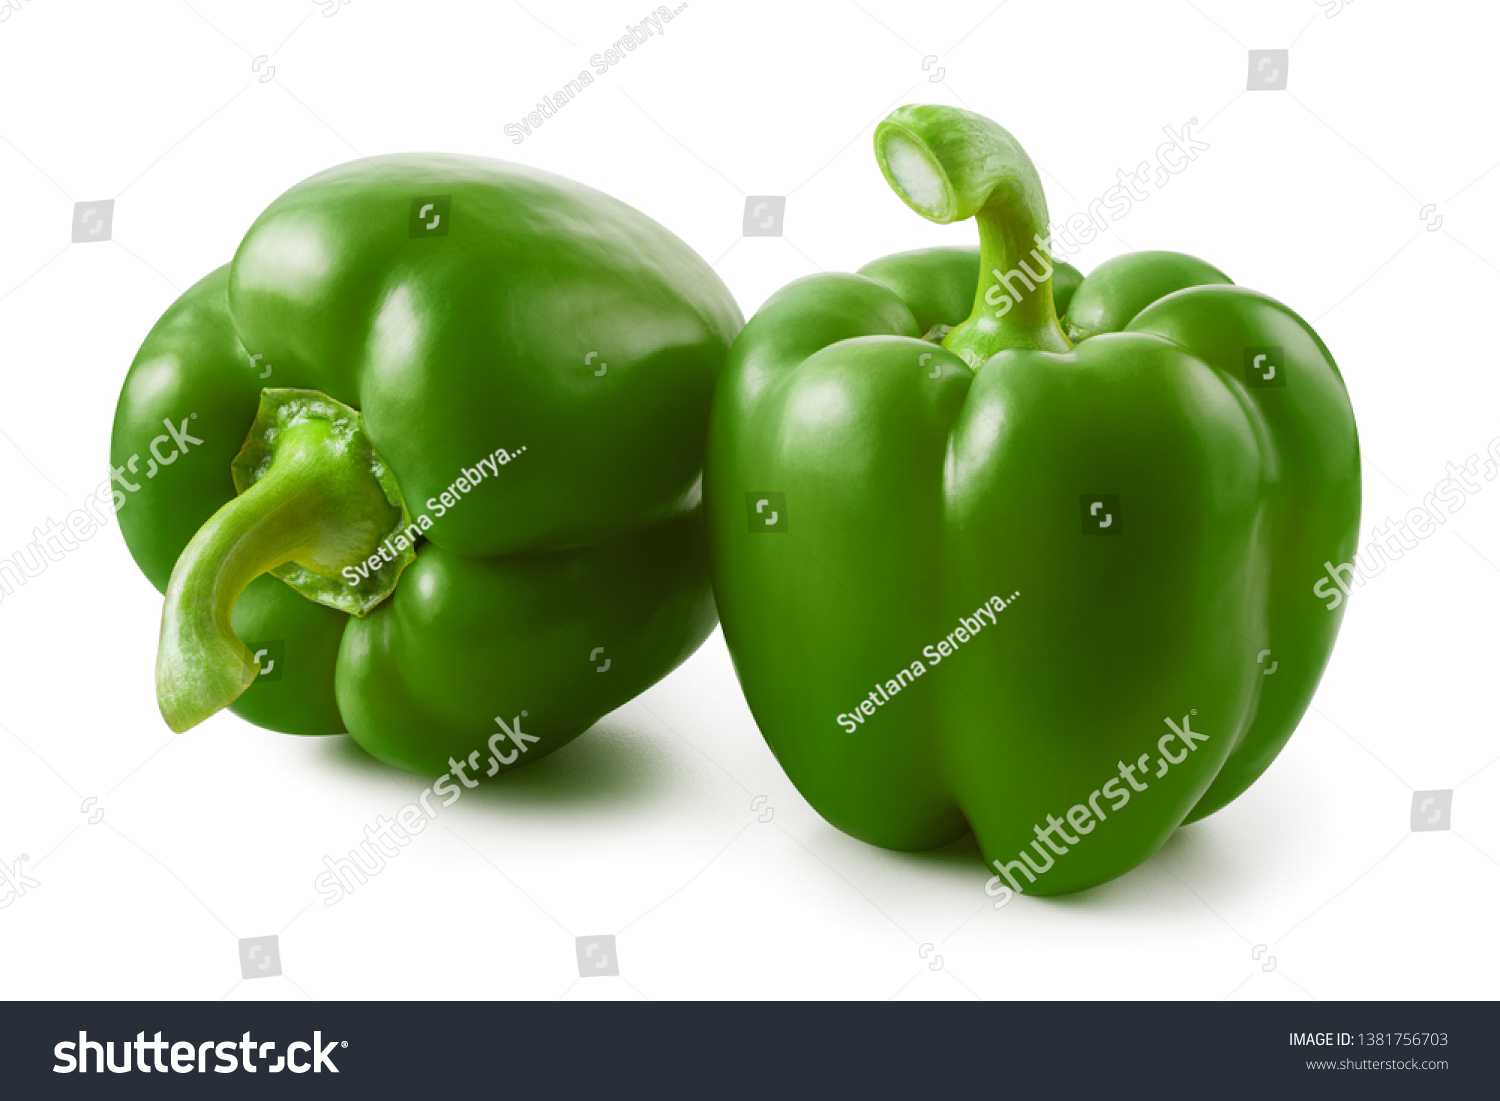 Green pepper isolated on white background #1381756703